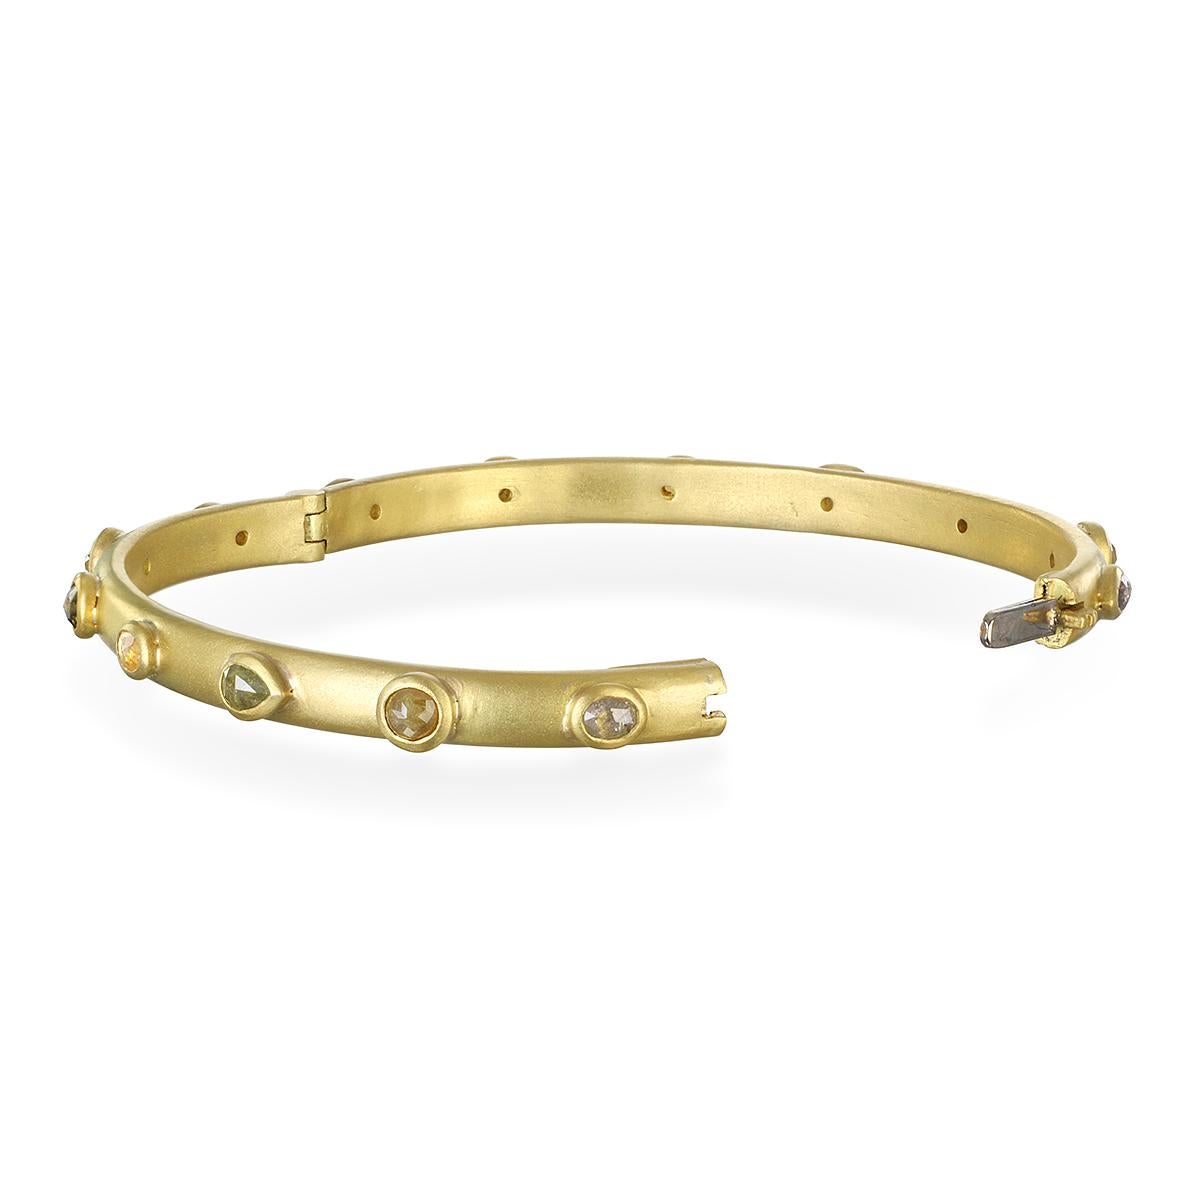 Handcrafted in 18k gold*, Faye Kim’s modern design integrates the natural subtle shades of raw, milky diamonds into a one of a kind hinged bangle bracelet that is both organic and timeless in feel, and which exudes an understated elegance. Can be